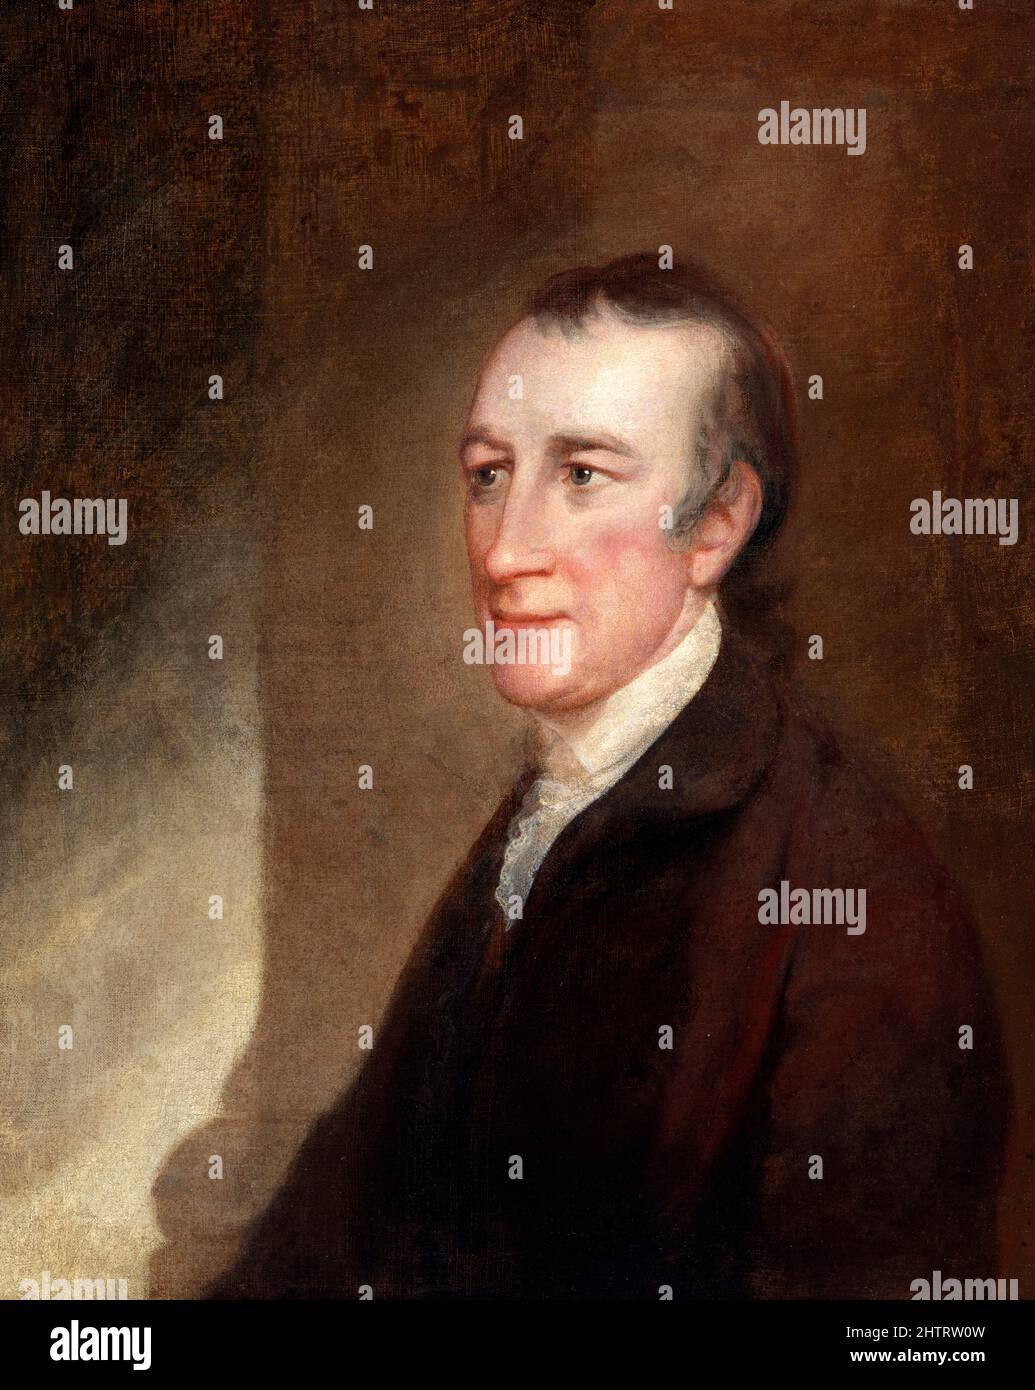 Portrait of Thomas Stone (1743-1787), one of the Founding Fathers of the United States, by Robert Edge Pine, oil on canvas, c. 1785 Stock Photo